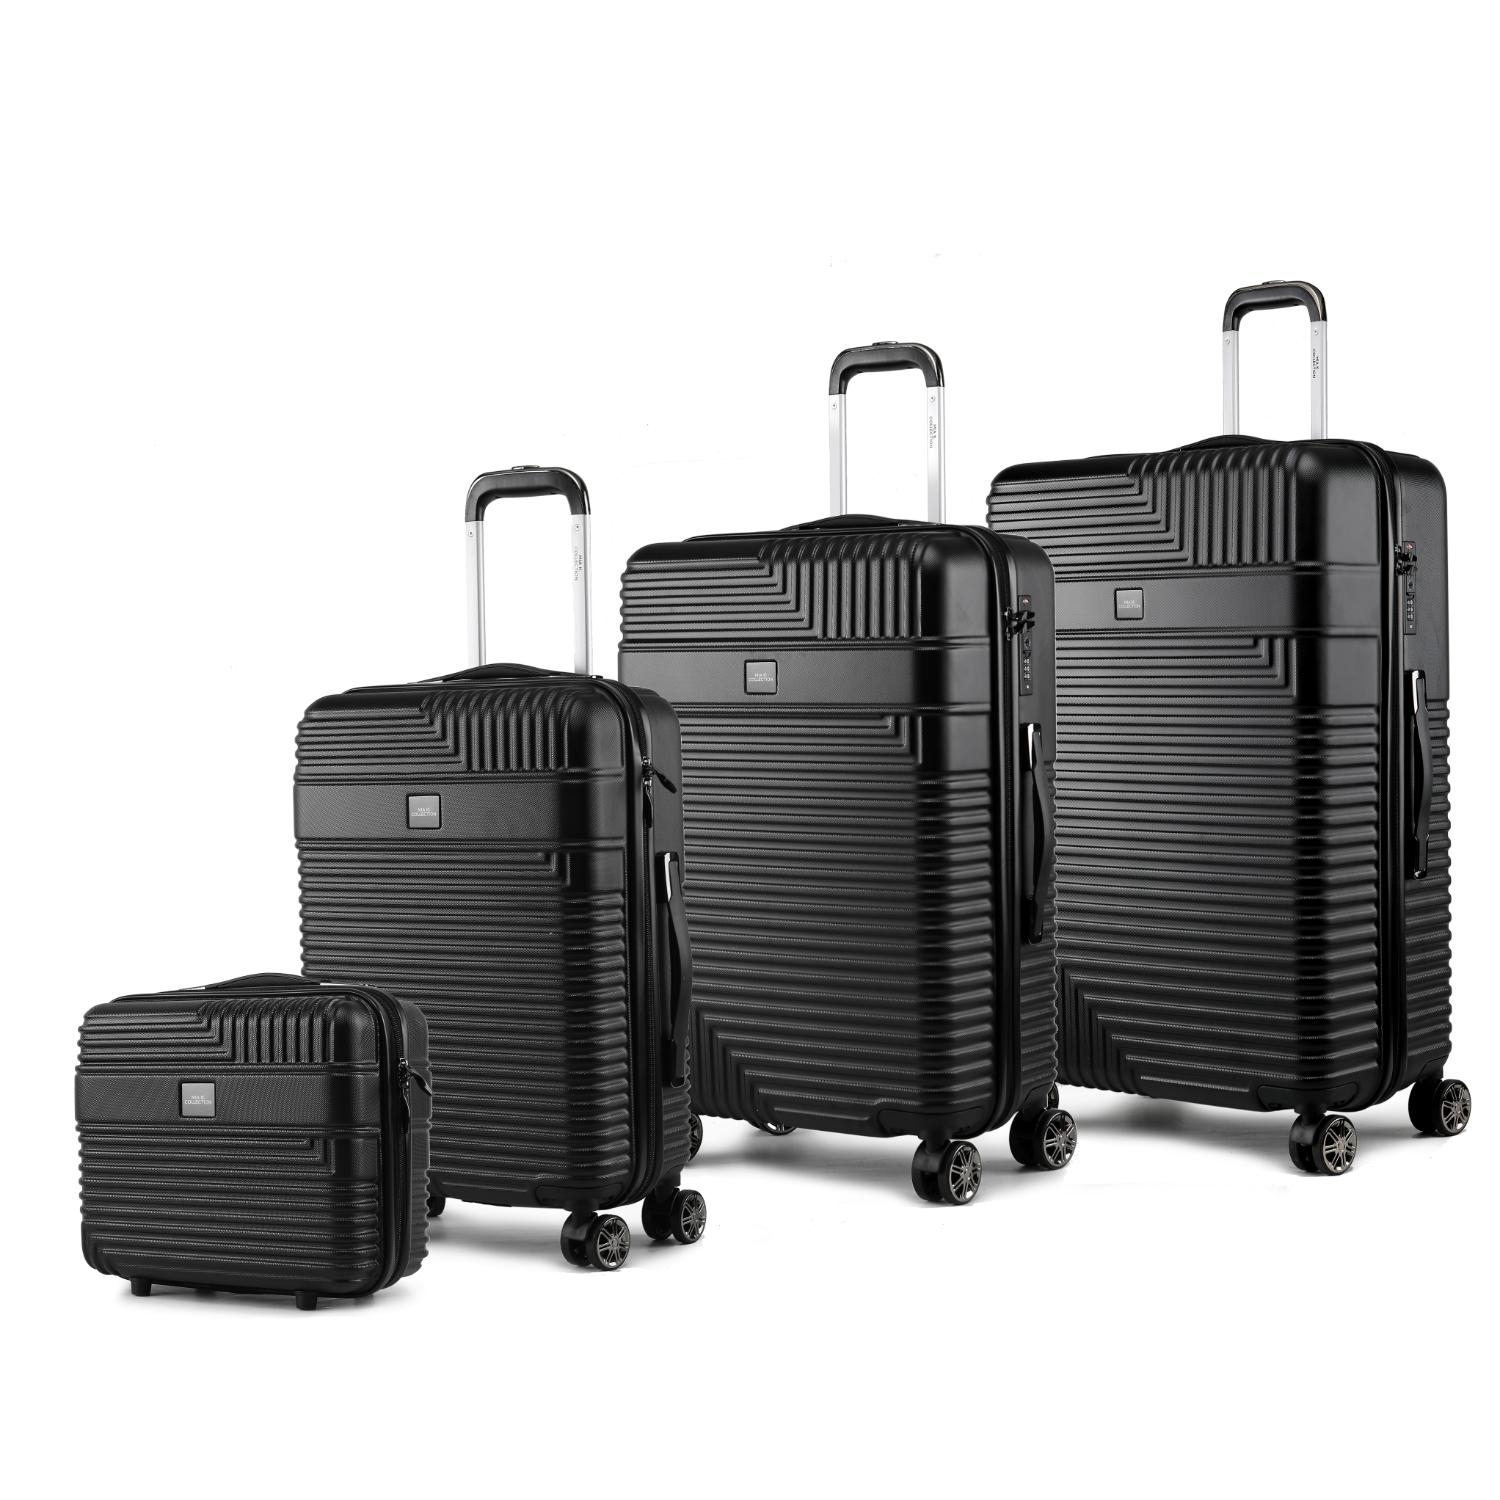 MKF Collection Mykonos Luggage Set- Extra Large Check-in, Large Check-in, Medium Carry-on, And Small Cosmetic Case 4 Pieces By Mia K - Silve